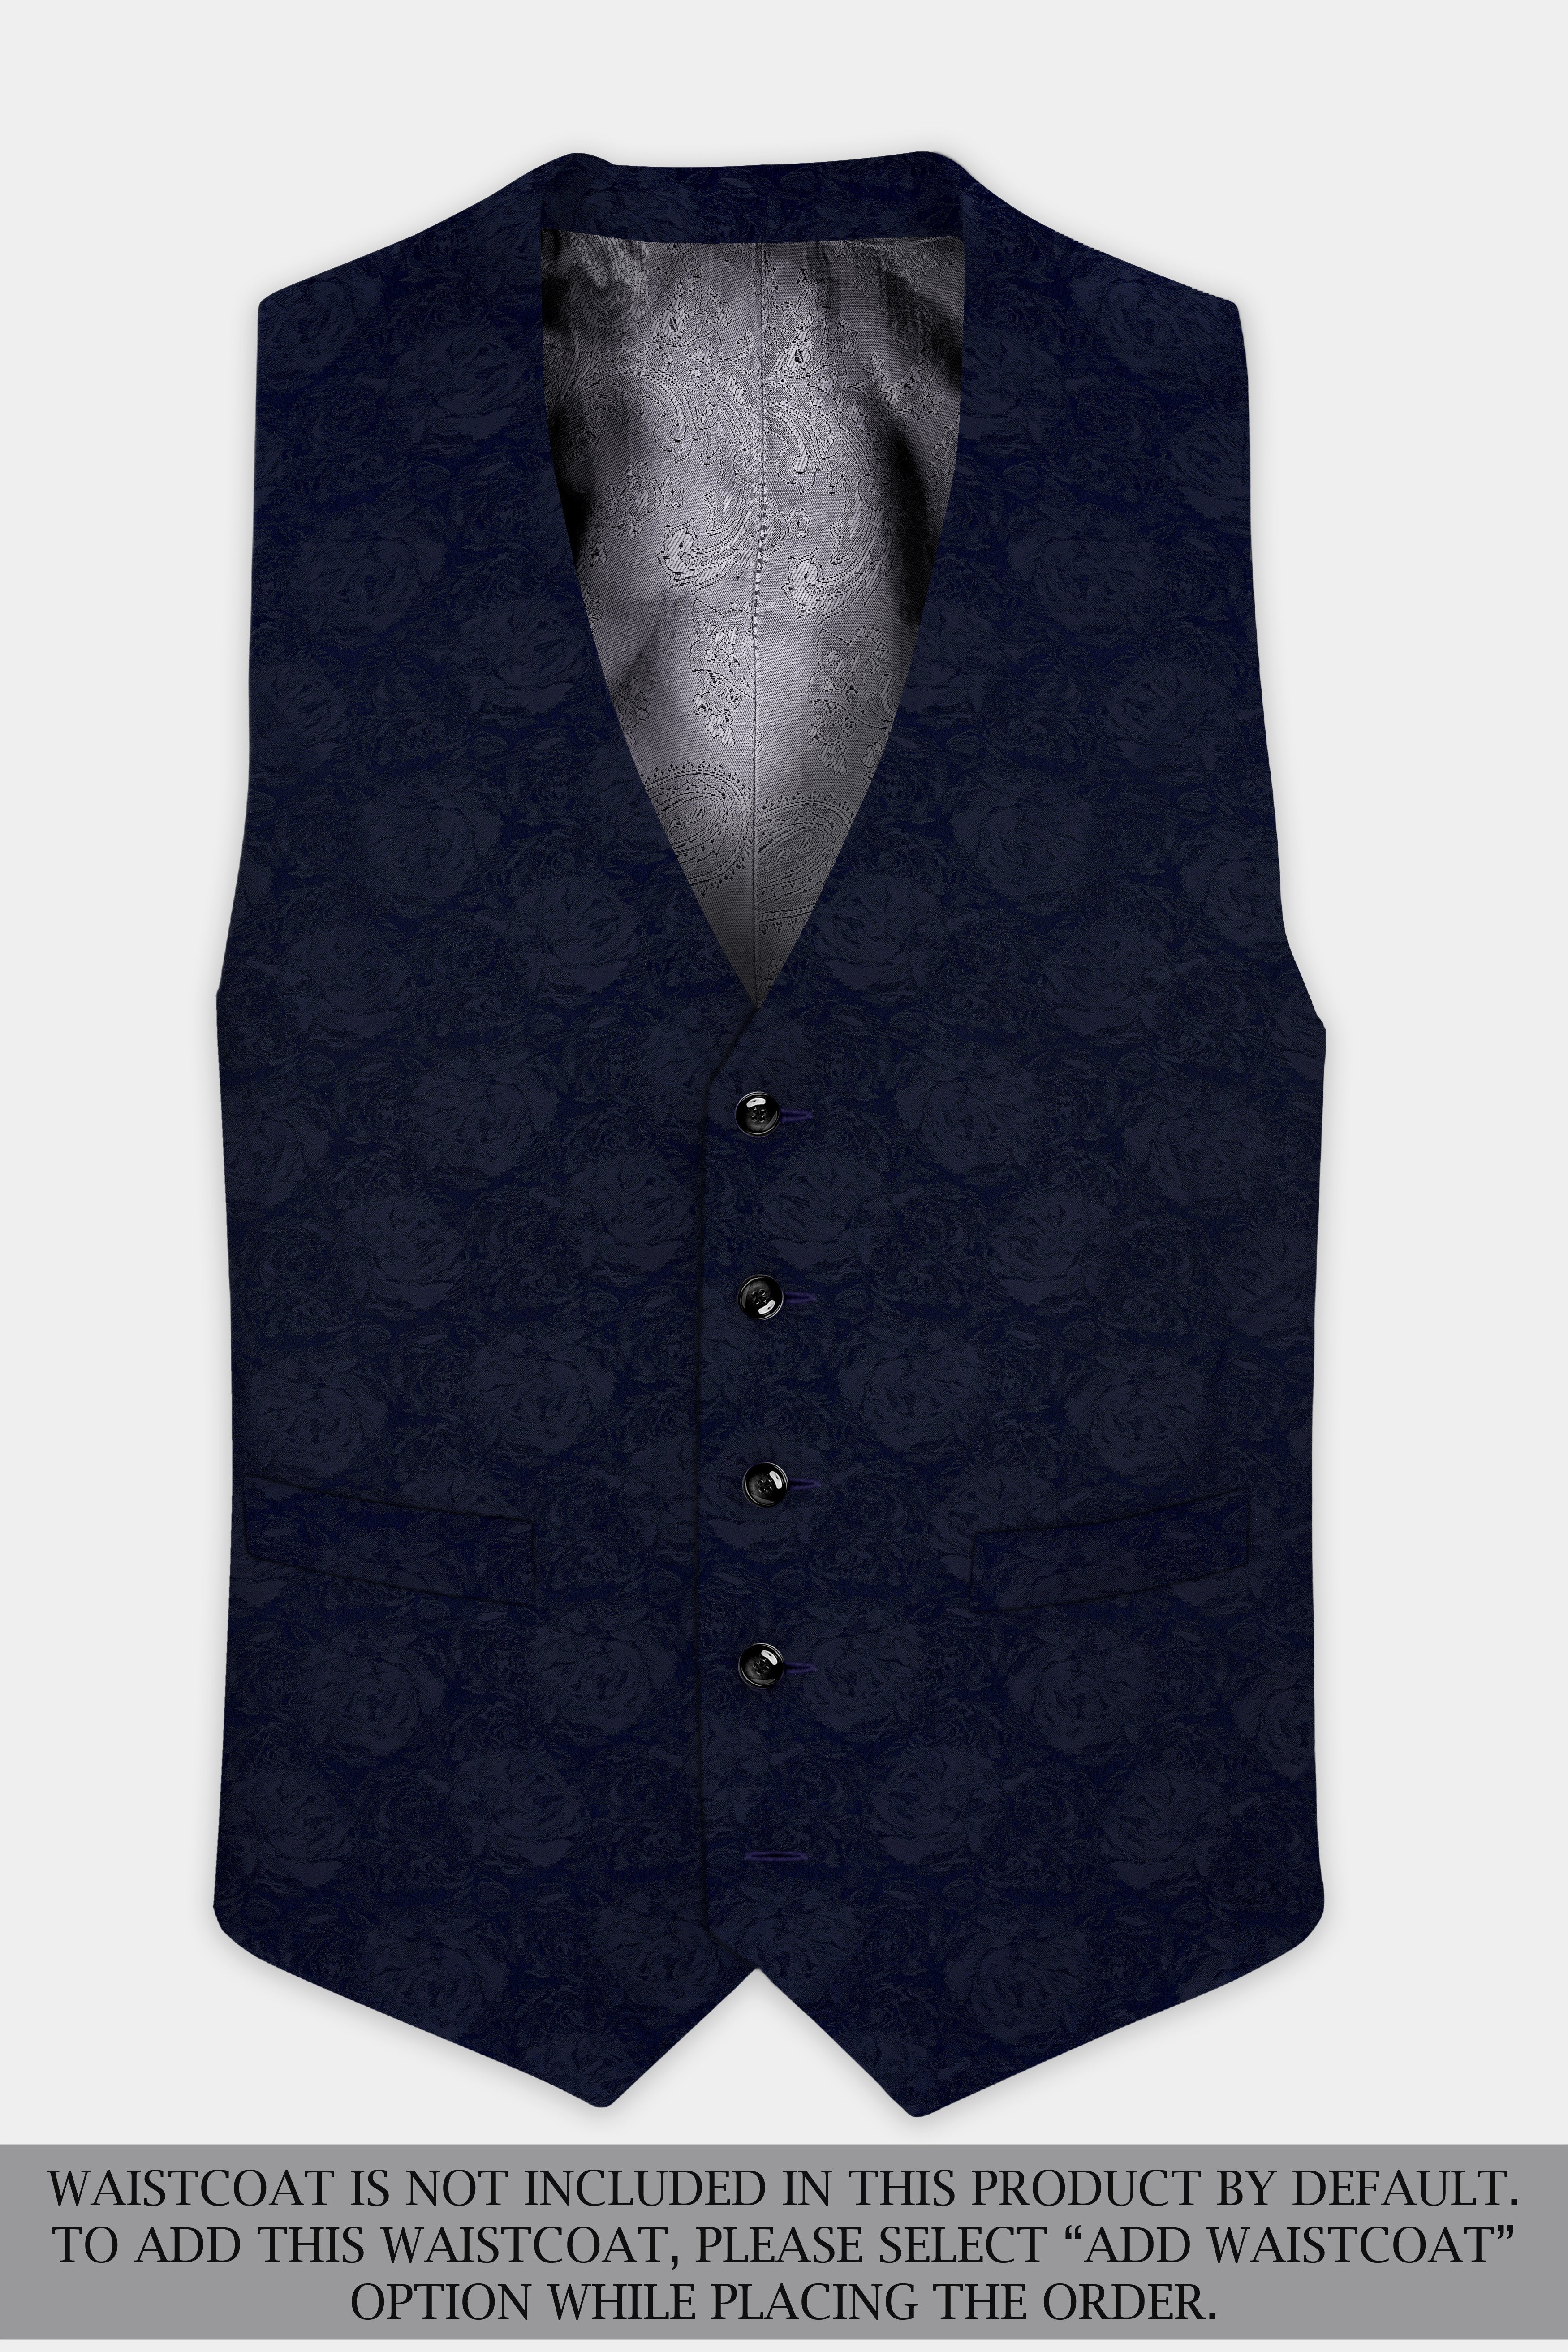 Firefly Blue Jacquard Textured Double Breasted Blazer